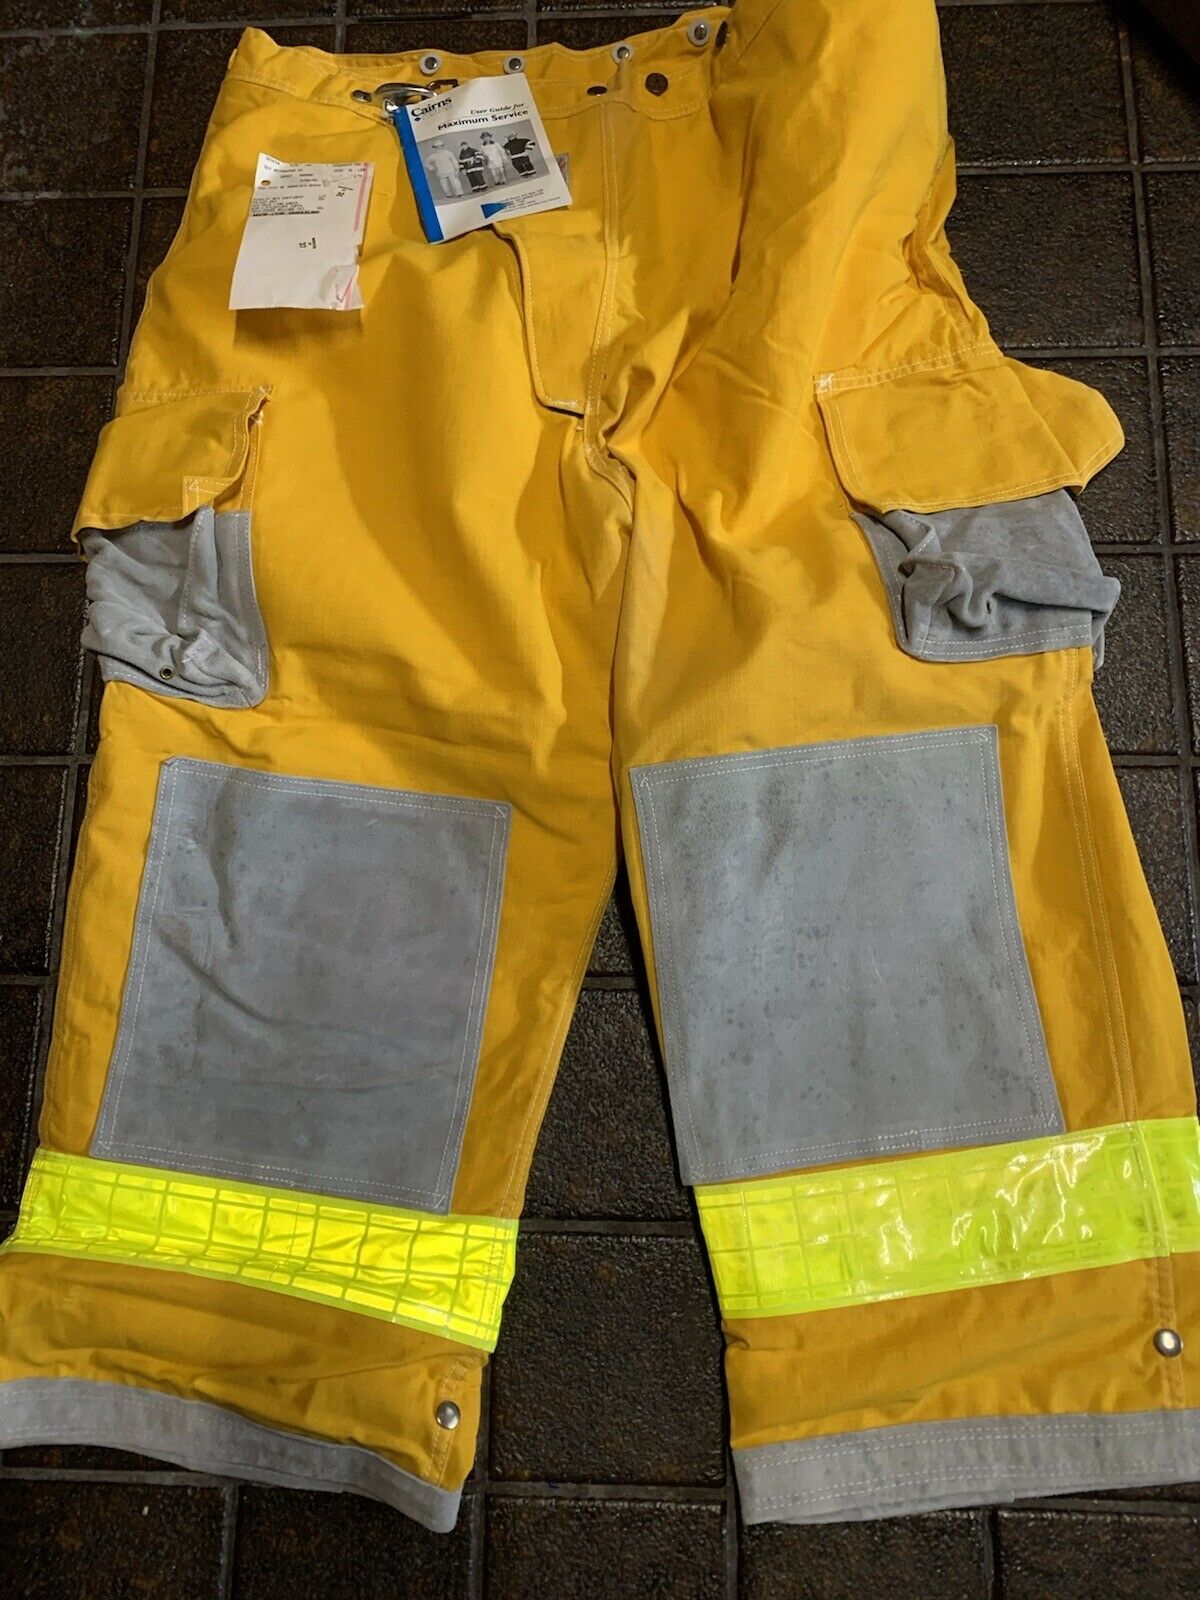 Cairns Firefighting Turnout Pants. 1995 w/ tags, never used. Size 44w 26l